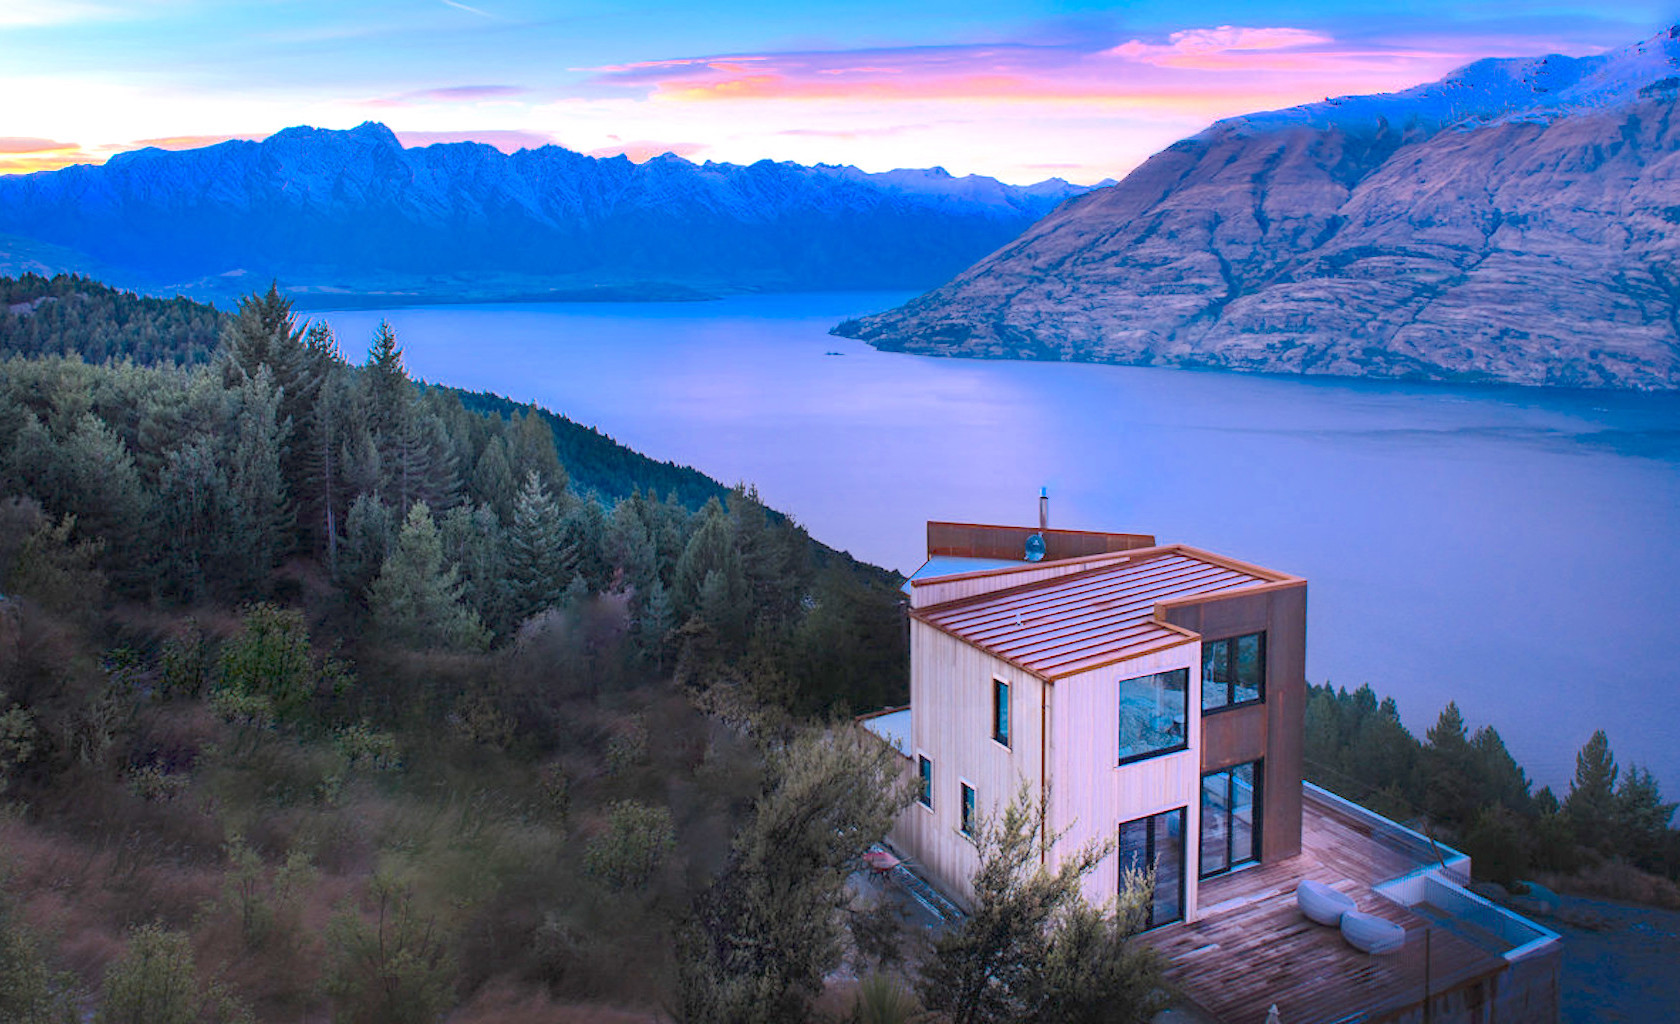 A house in Queenstown has the most-liked photo on Airbnb's Instagram in 2018